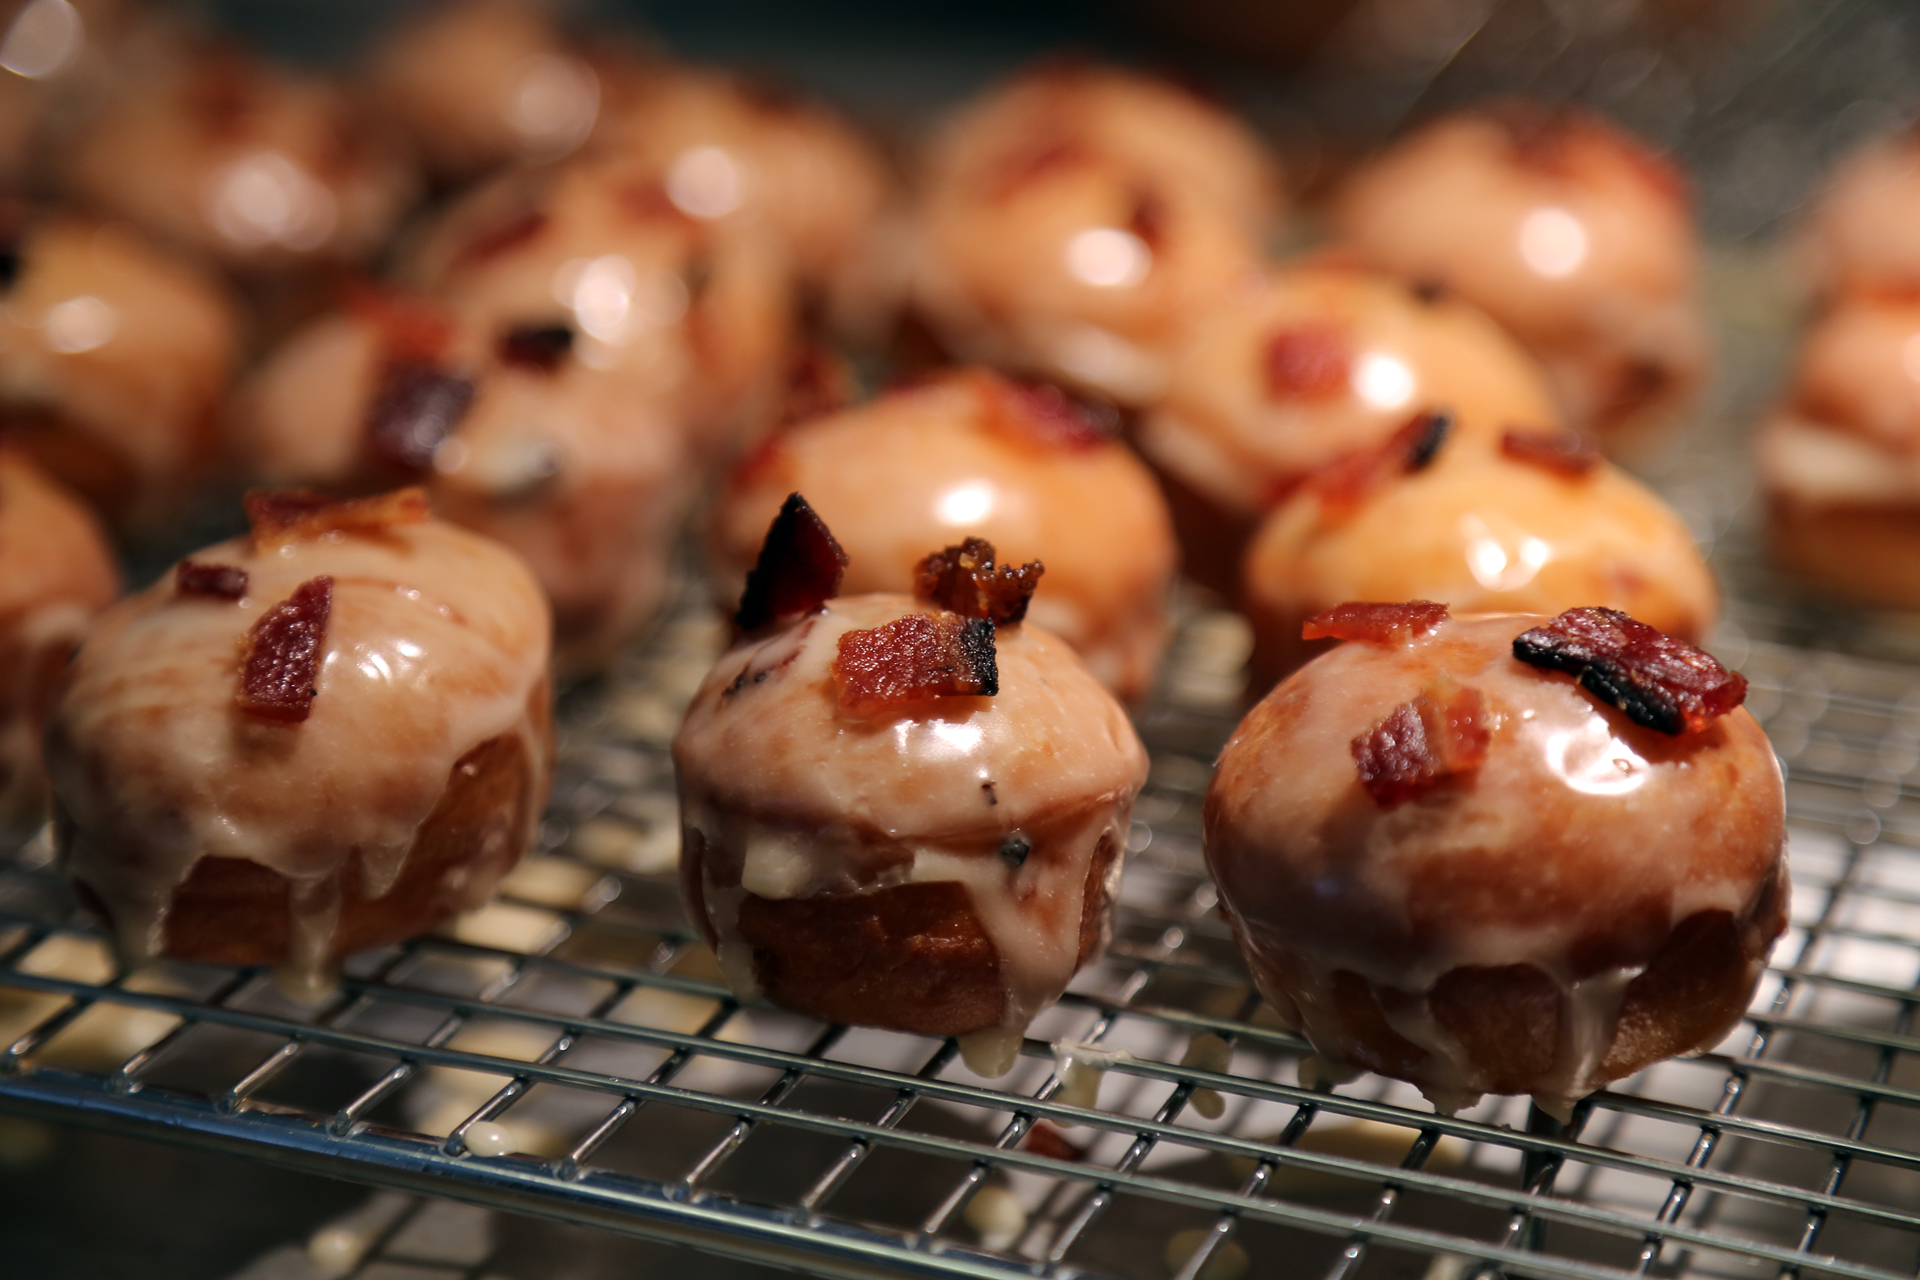  Immediately sprinkle them with bacon while the glaze is wet; let the glaze set before serving.